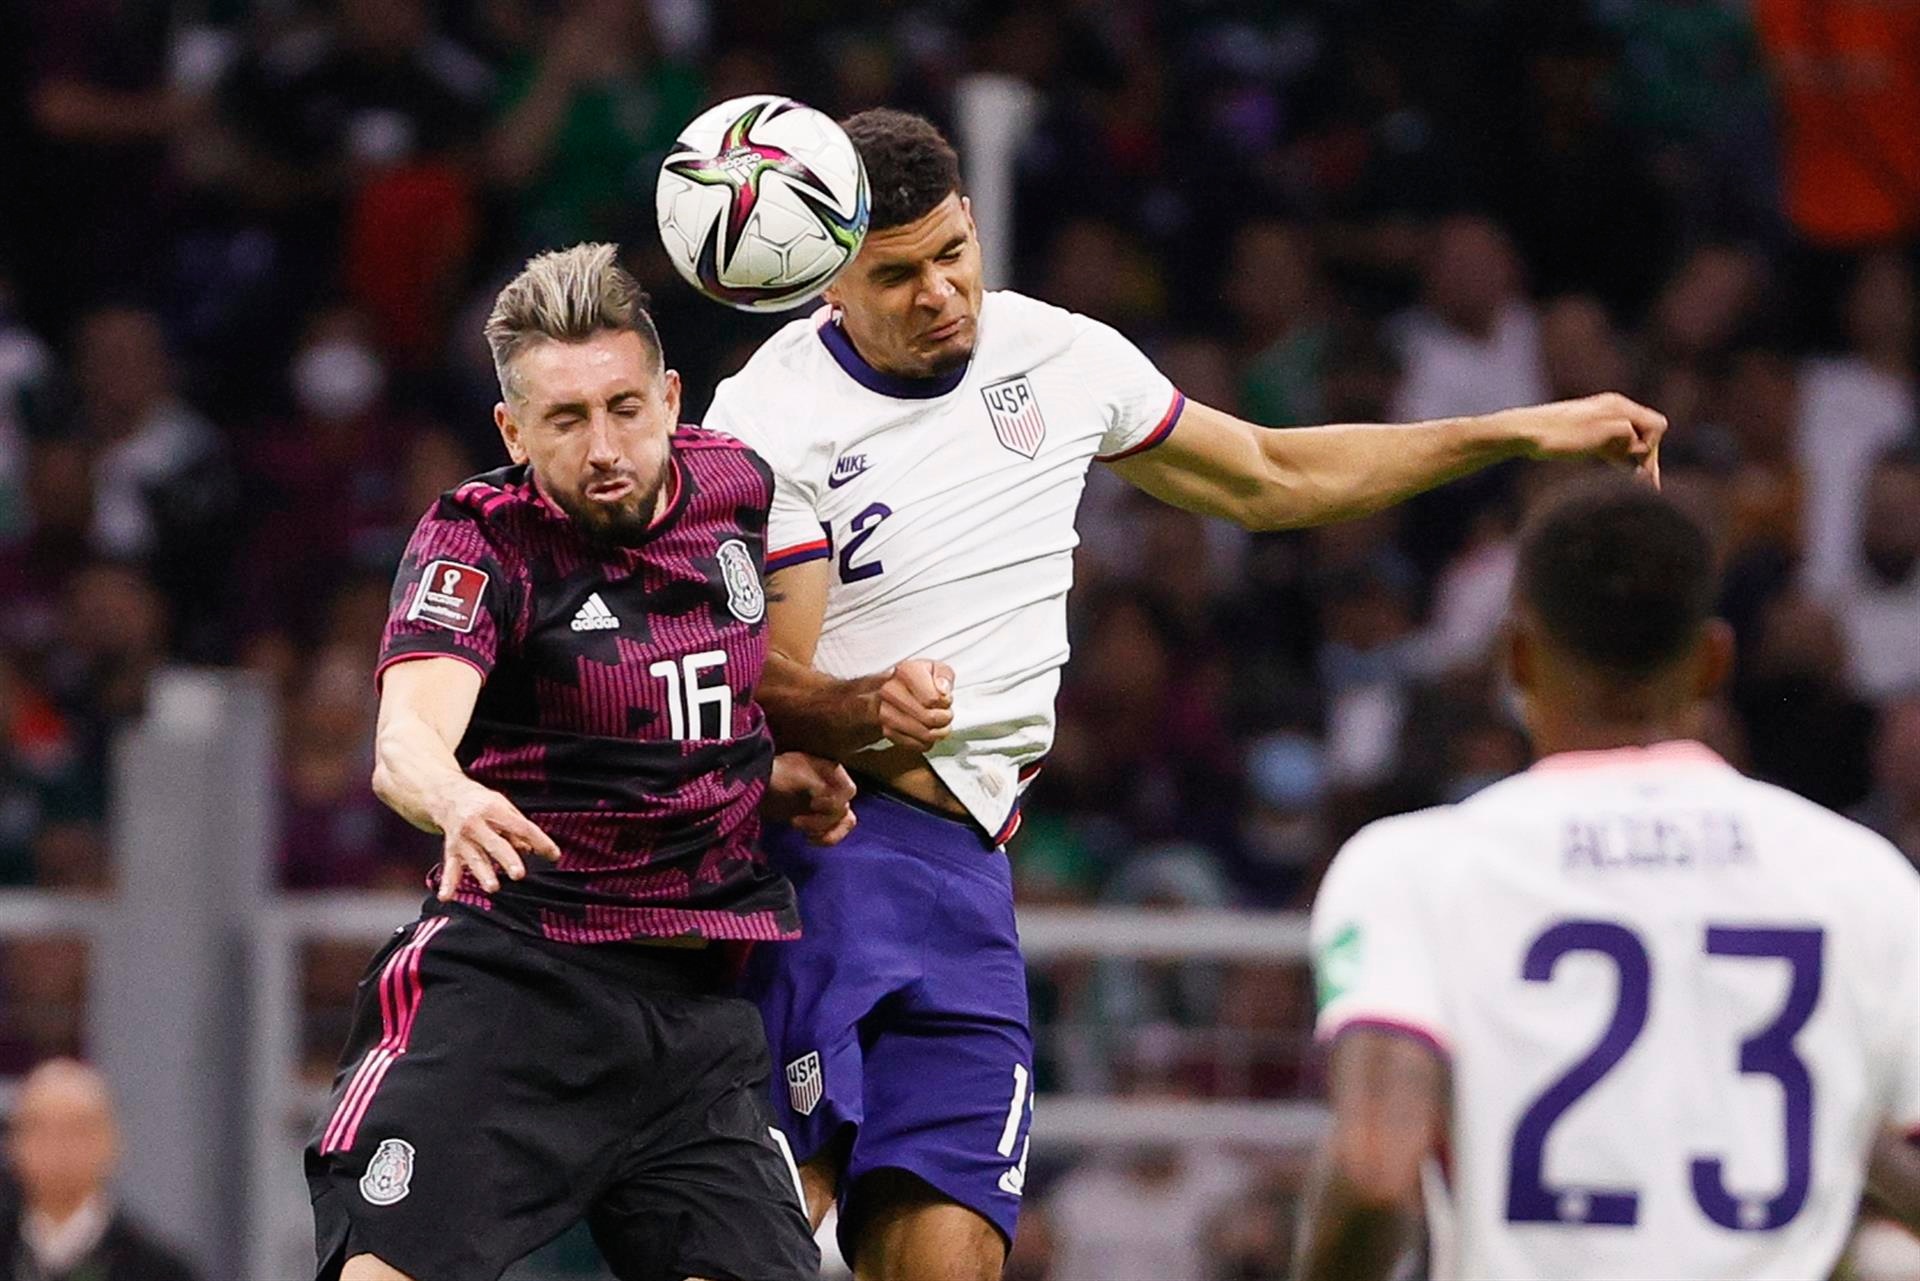 Mexico and USA edge closer to World Cup qualification after tight stalemate